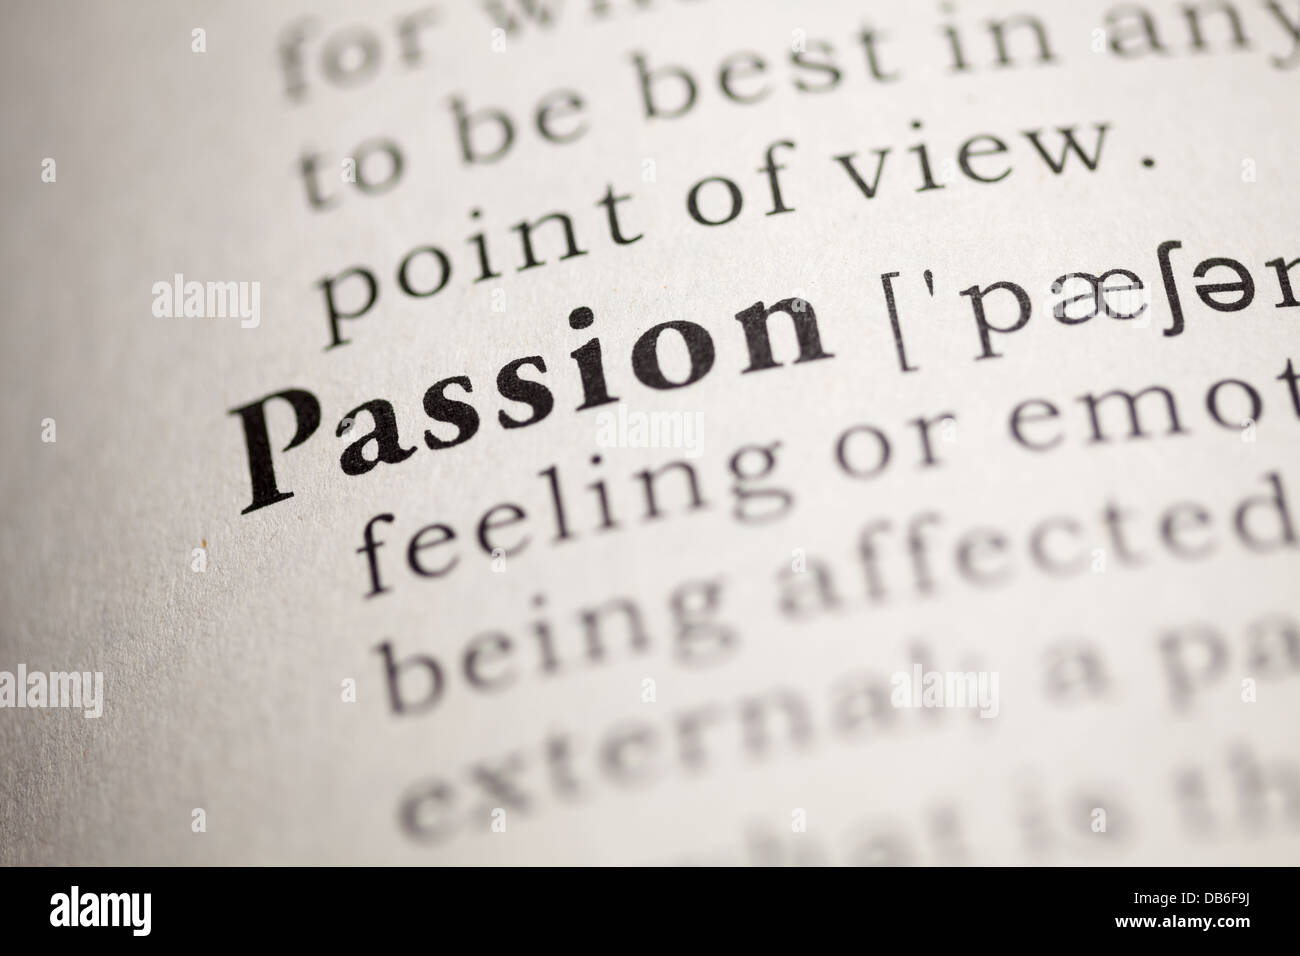 Fake Dictionary, Dictionary definition of the word Passion. Stock Photo